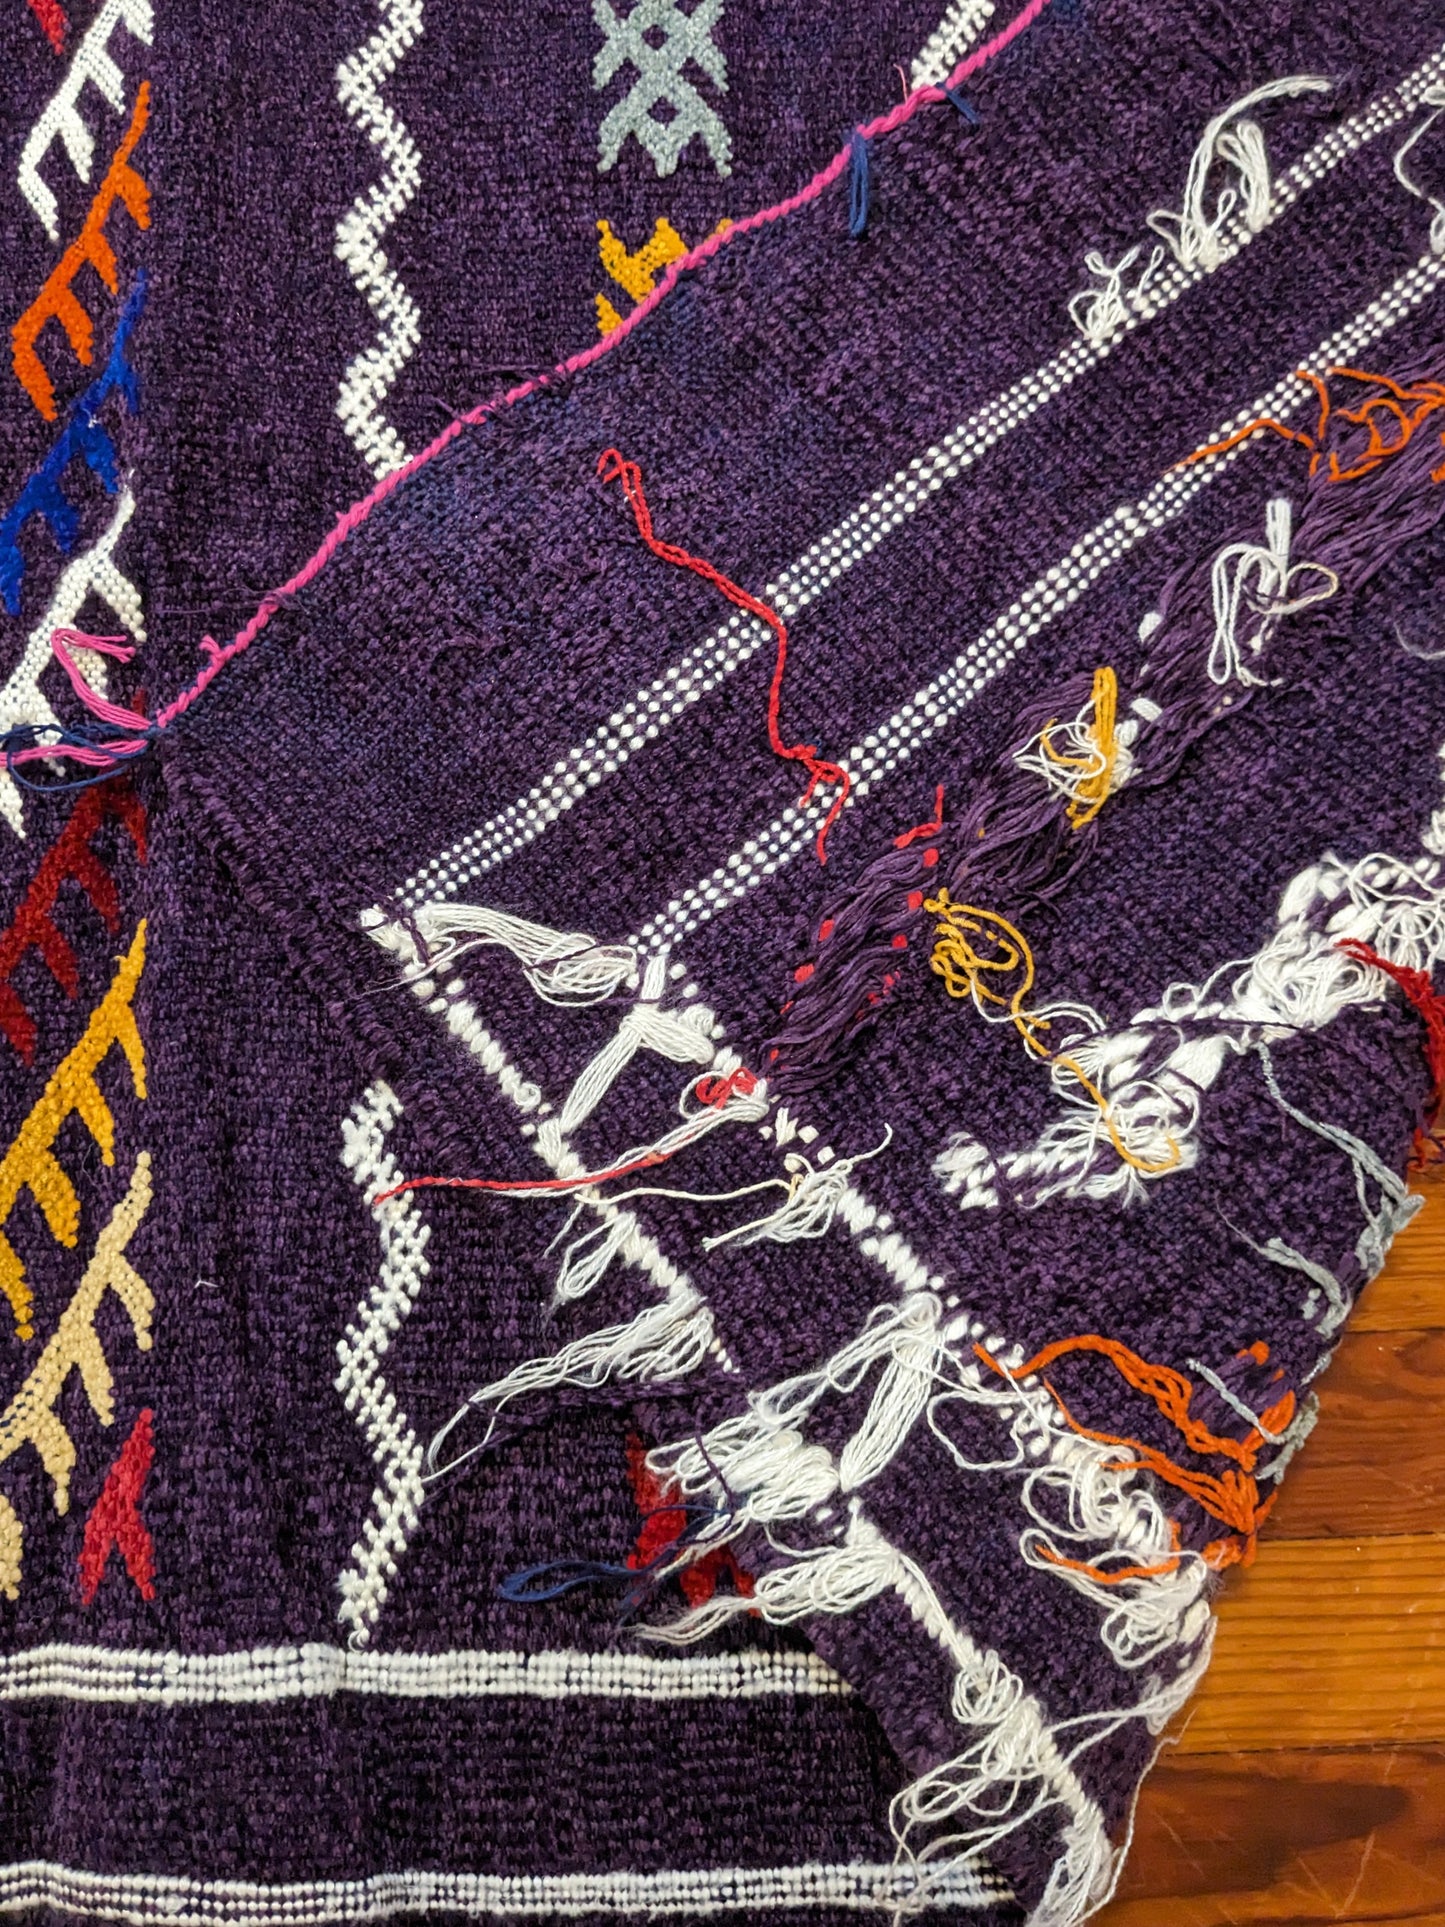 A Purple Rug with Berber Patterns